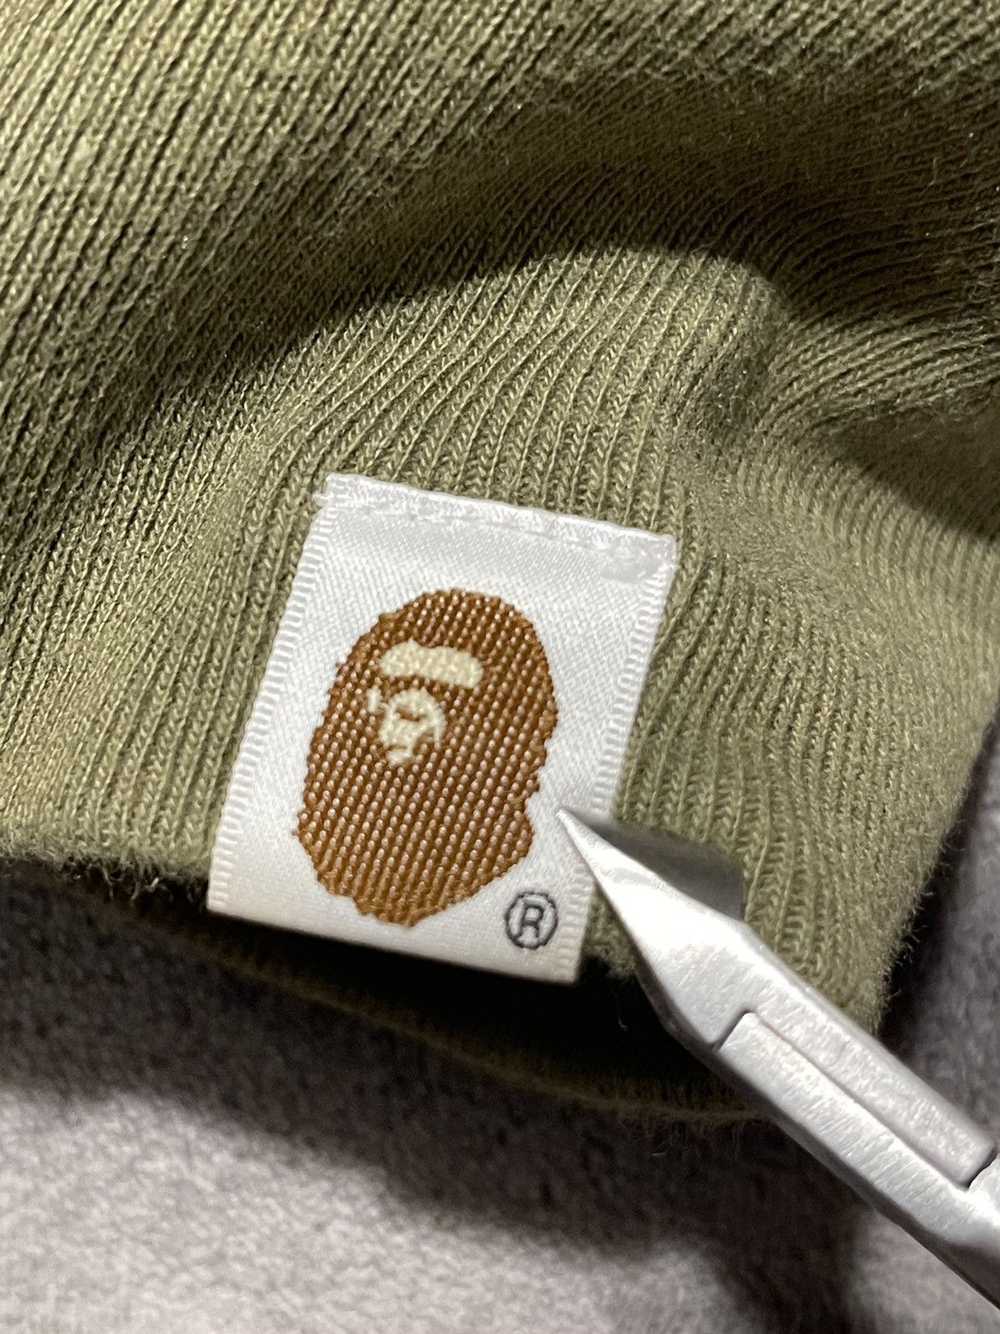 Bape 1st Camo College Pullover Hoodie - image 4